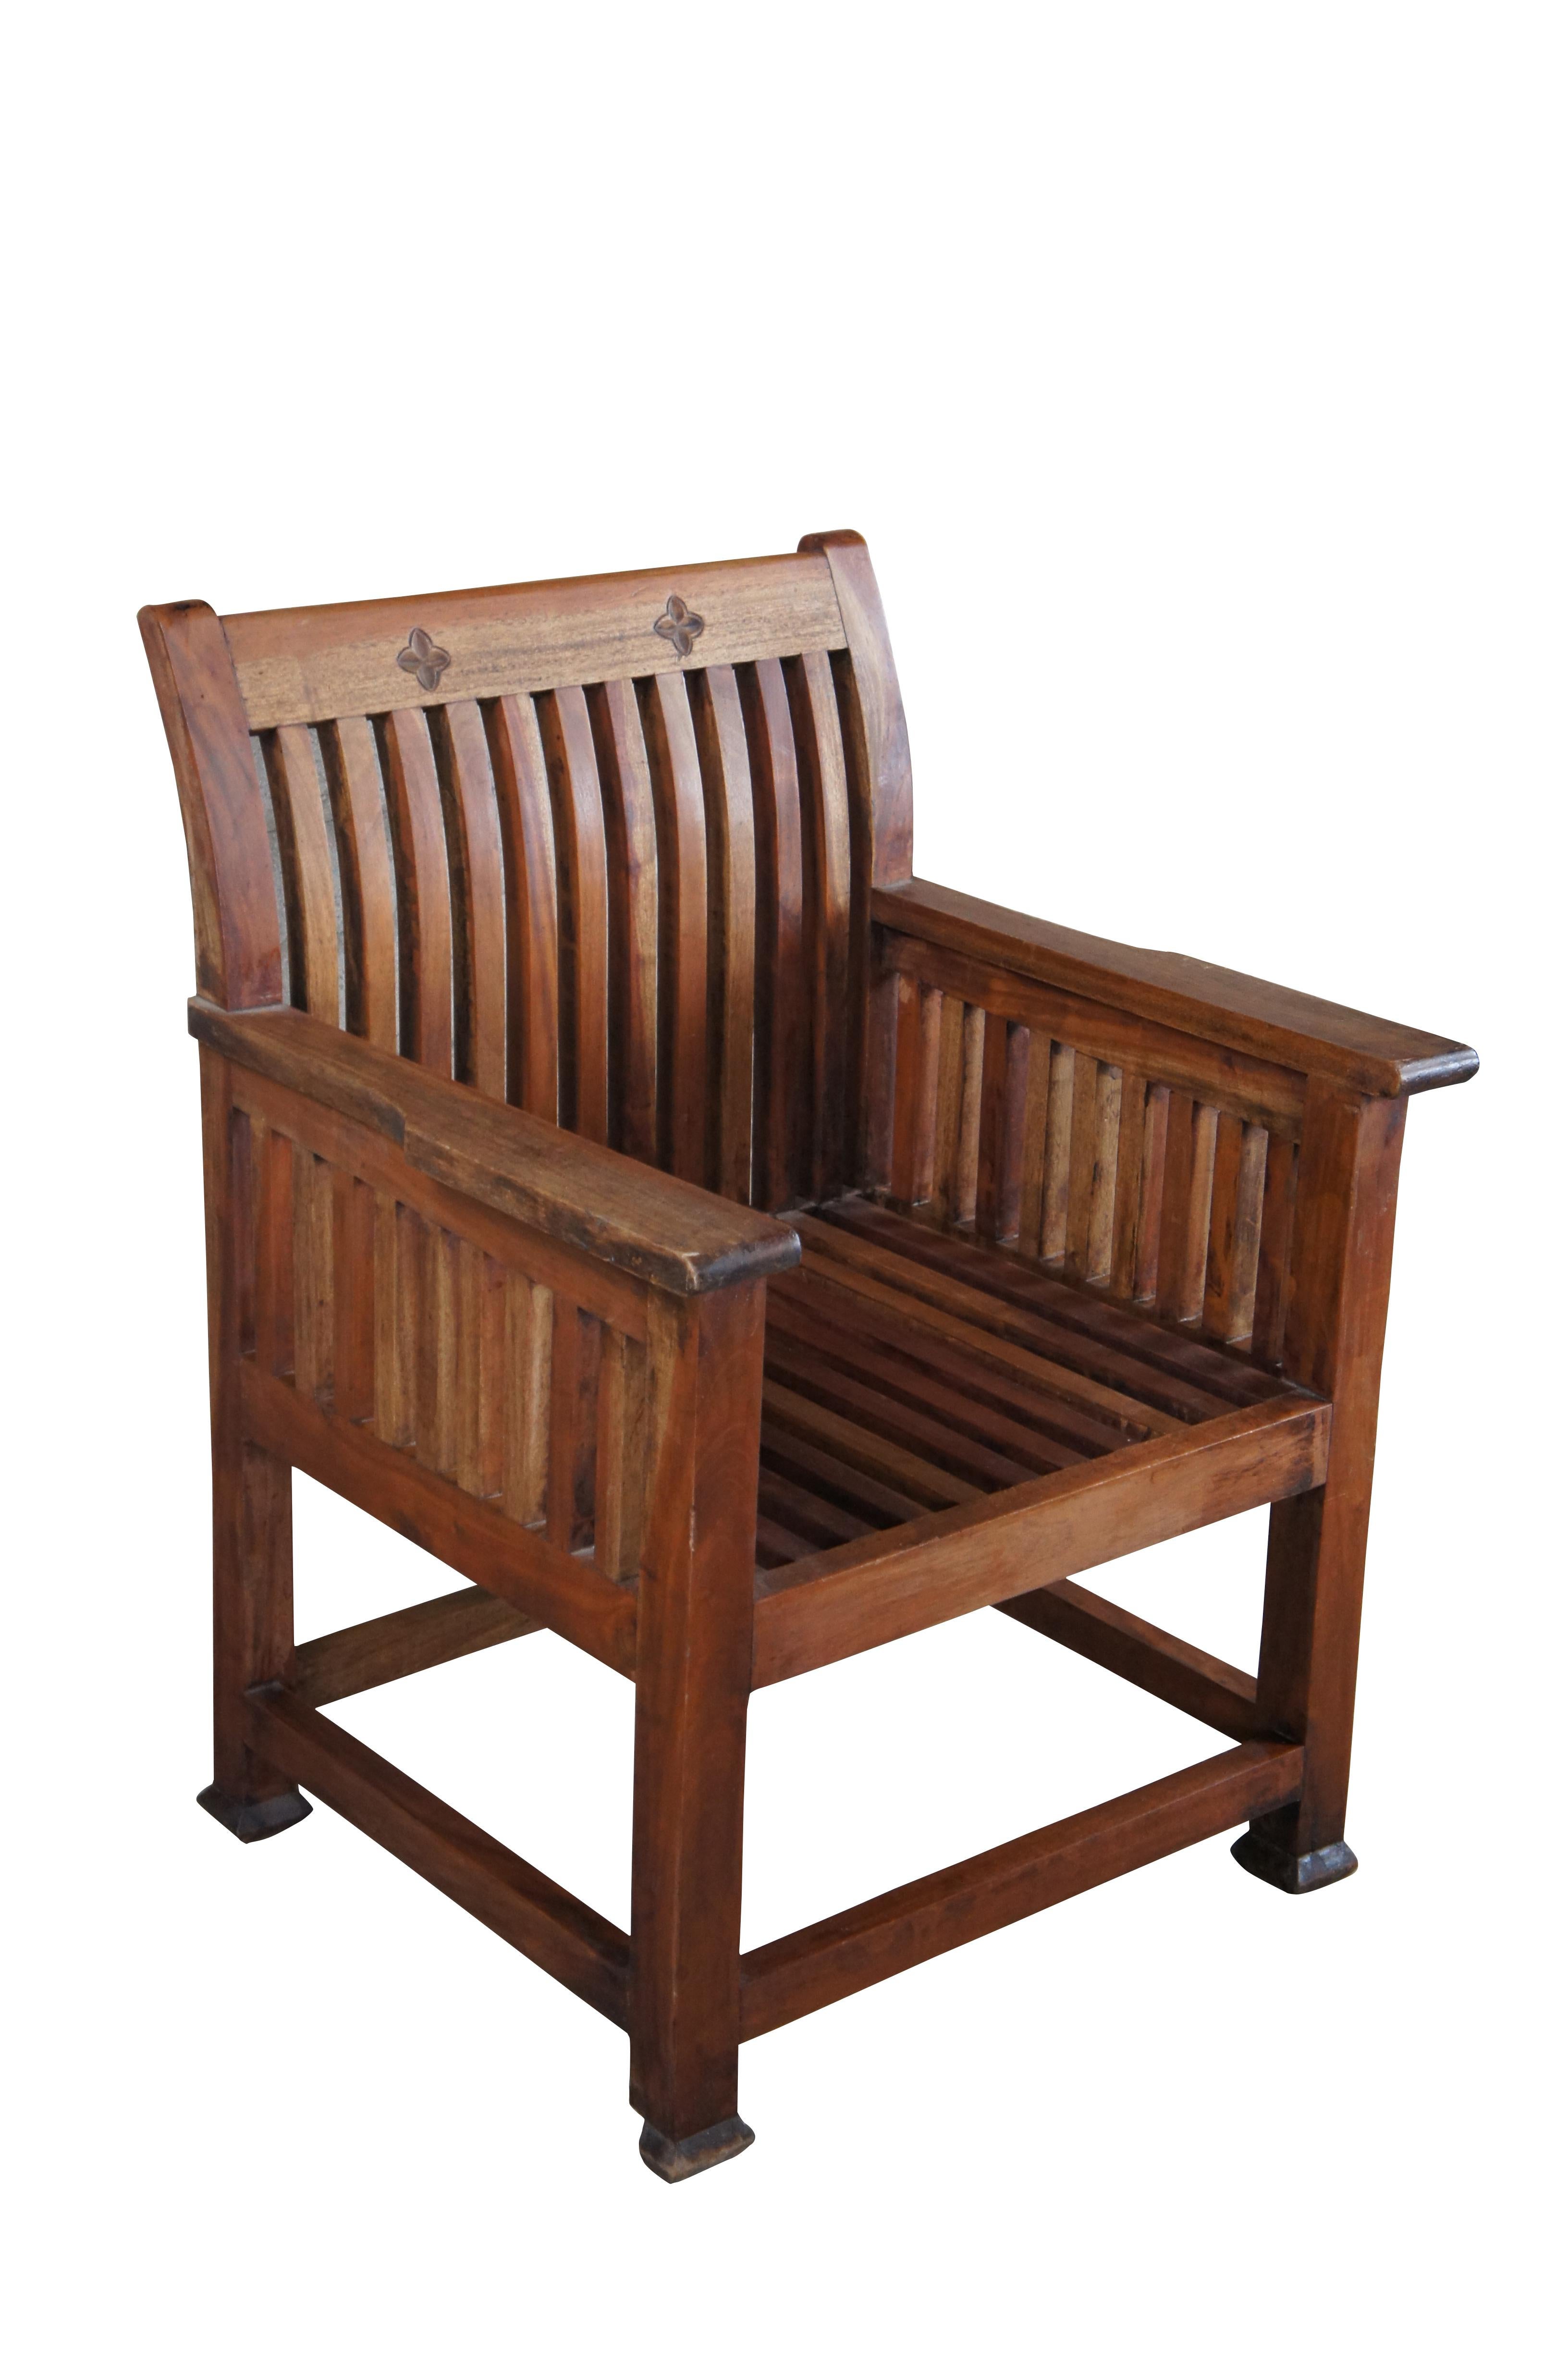 Solid teak arm chair. Features a square form with slatted back and sides. Back is flared with two carved florets. 

Dimensions:
26